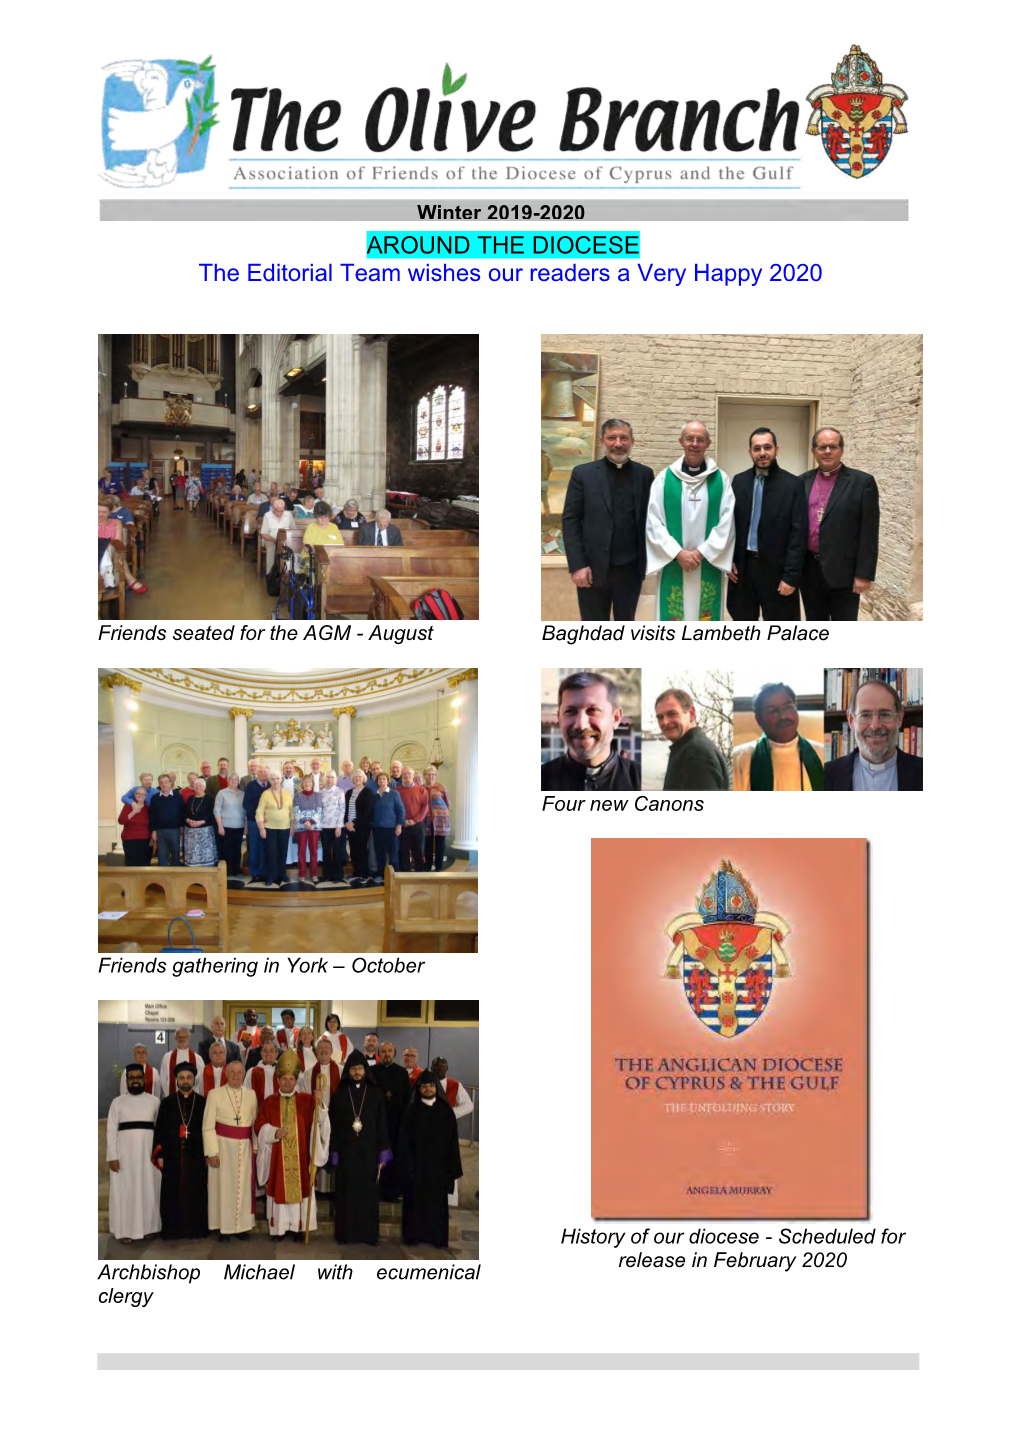 Winter 2019-2020 AROUND the DIOCESE the Editorial Team Wishes Our Readers a Very Happy 2020